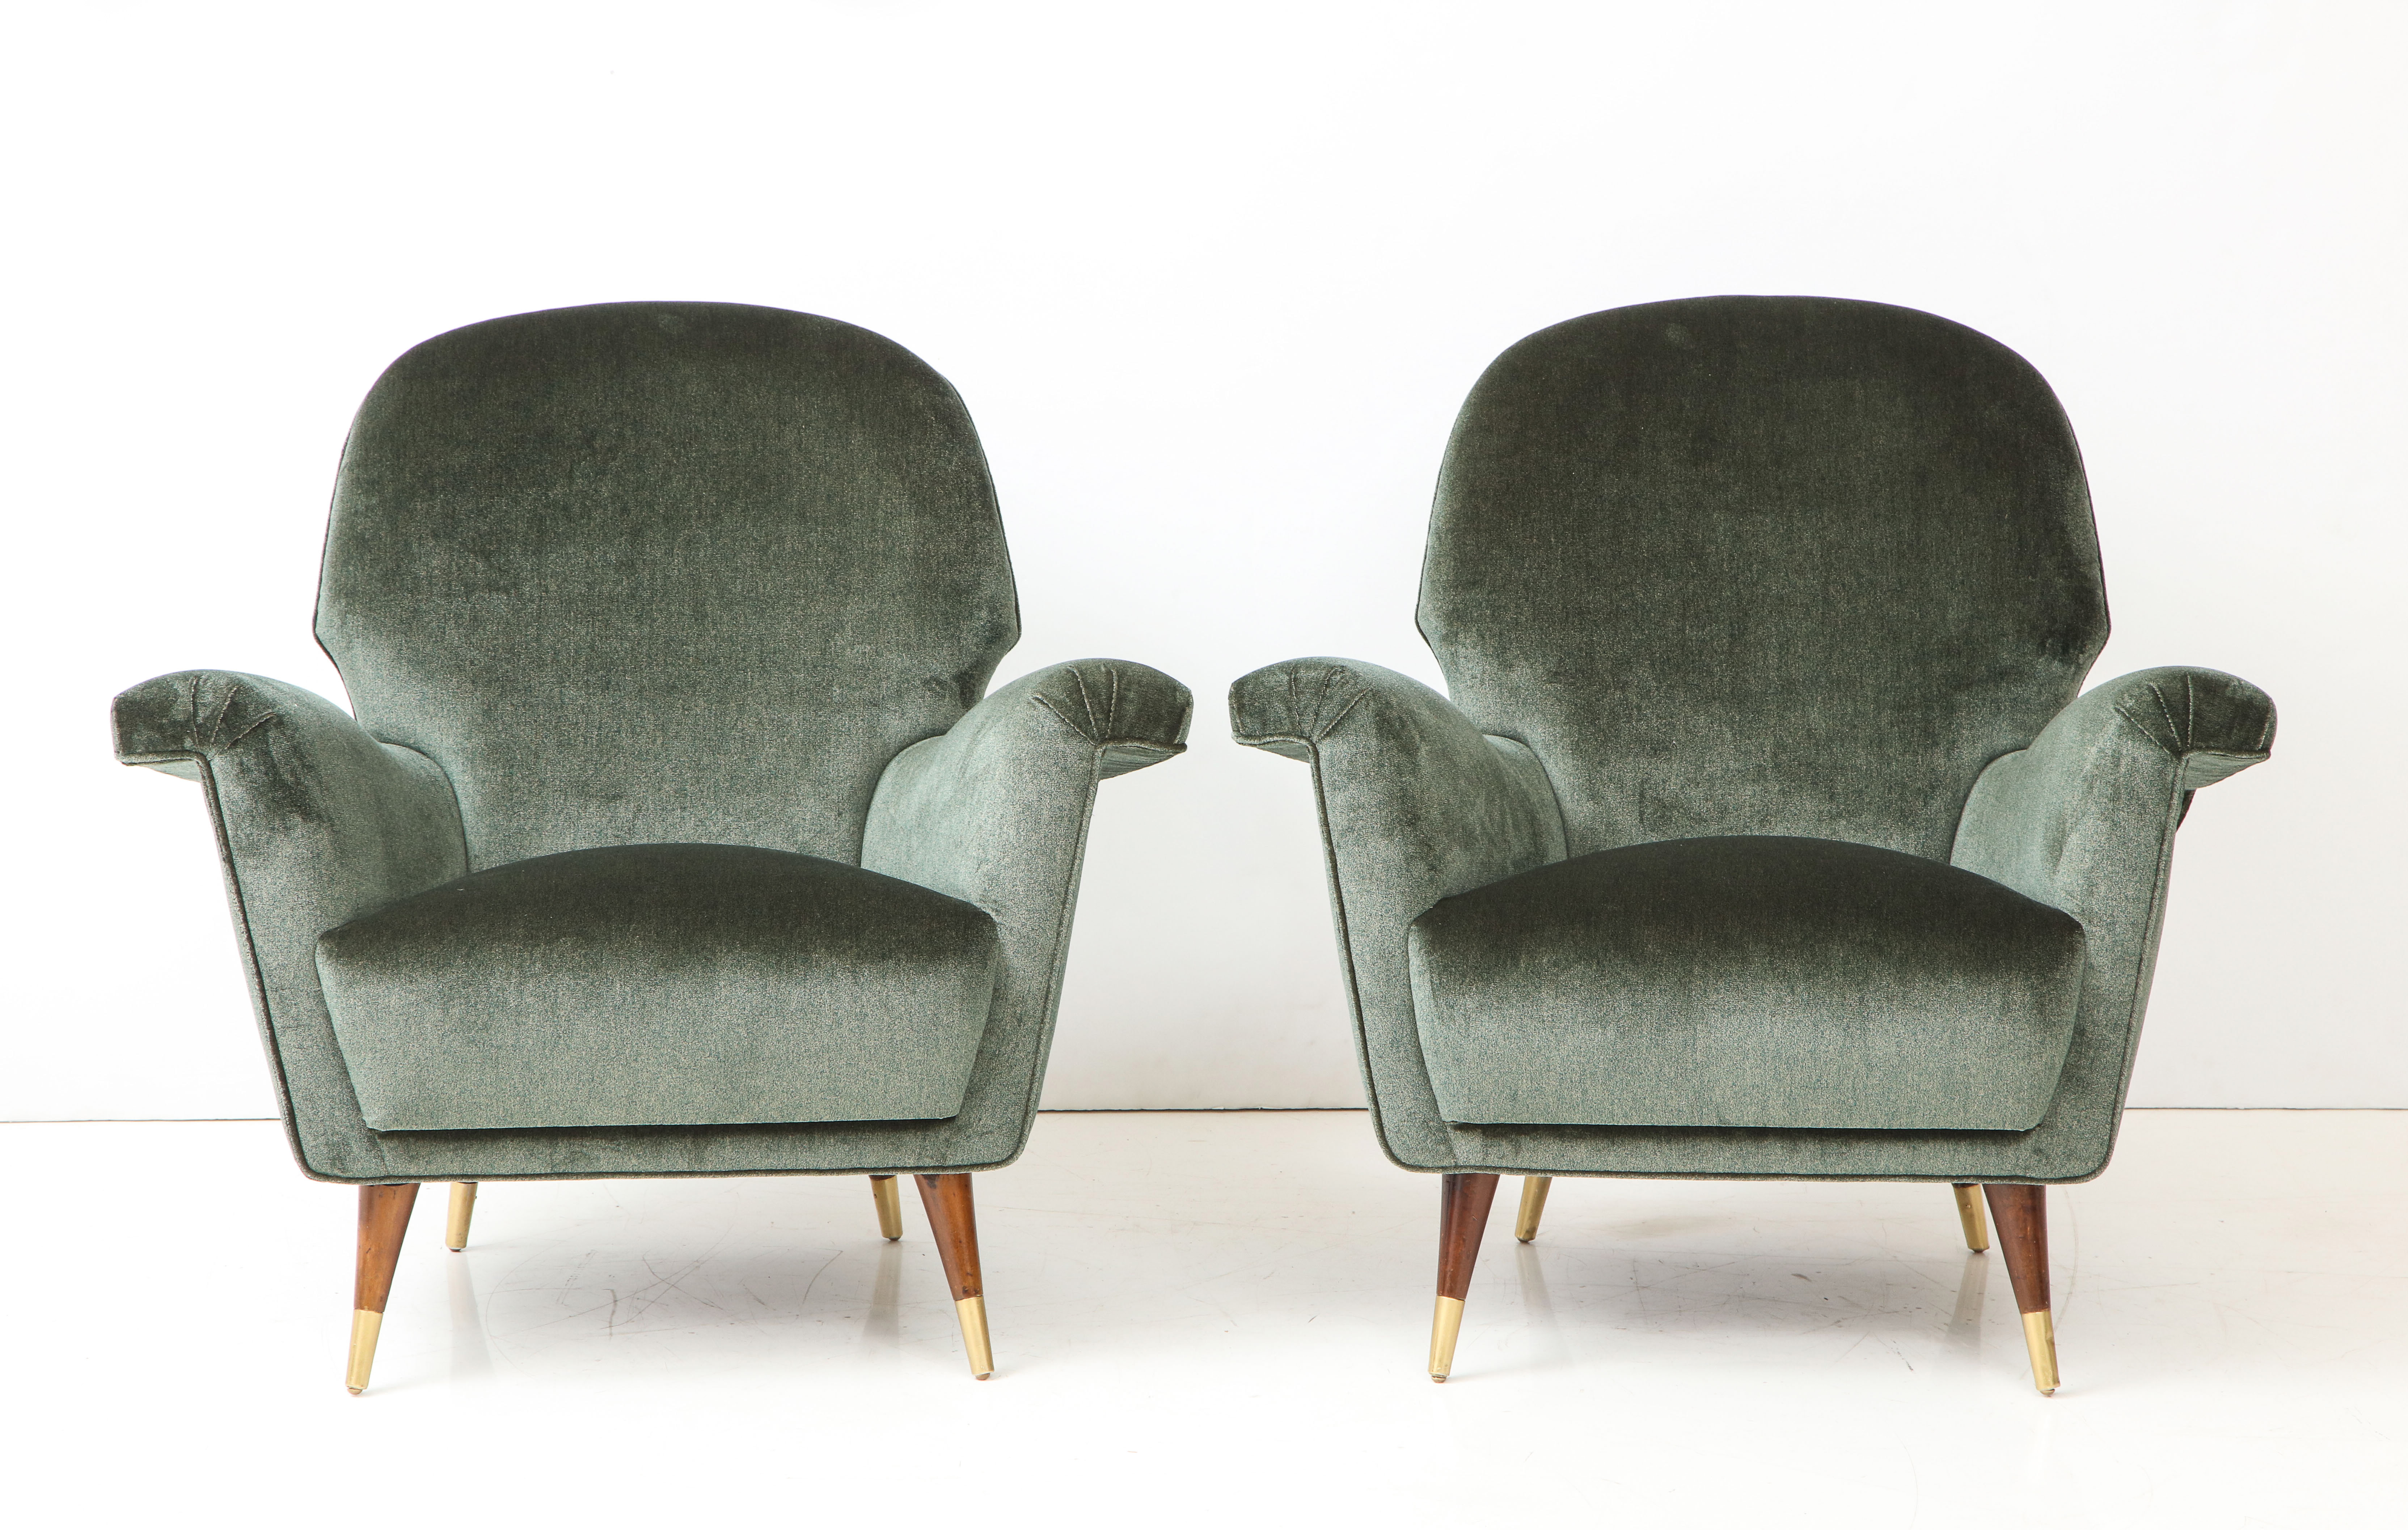 Pair of Mid Century Club Chairs. Walnut legs and brass details.